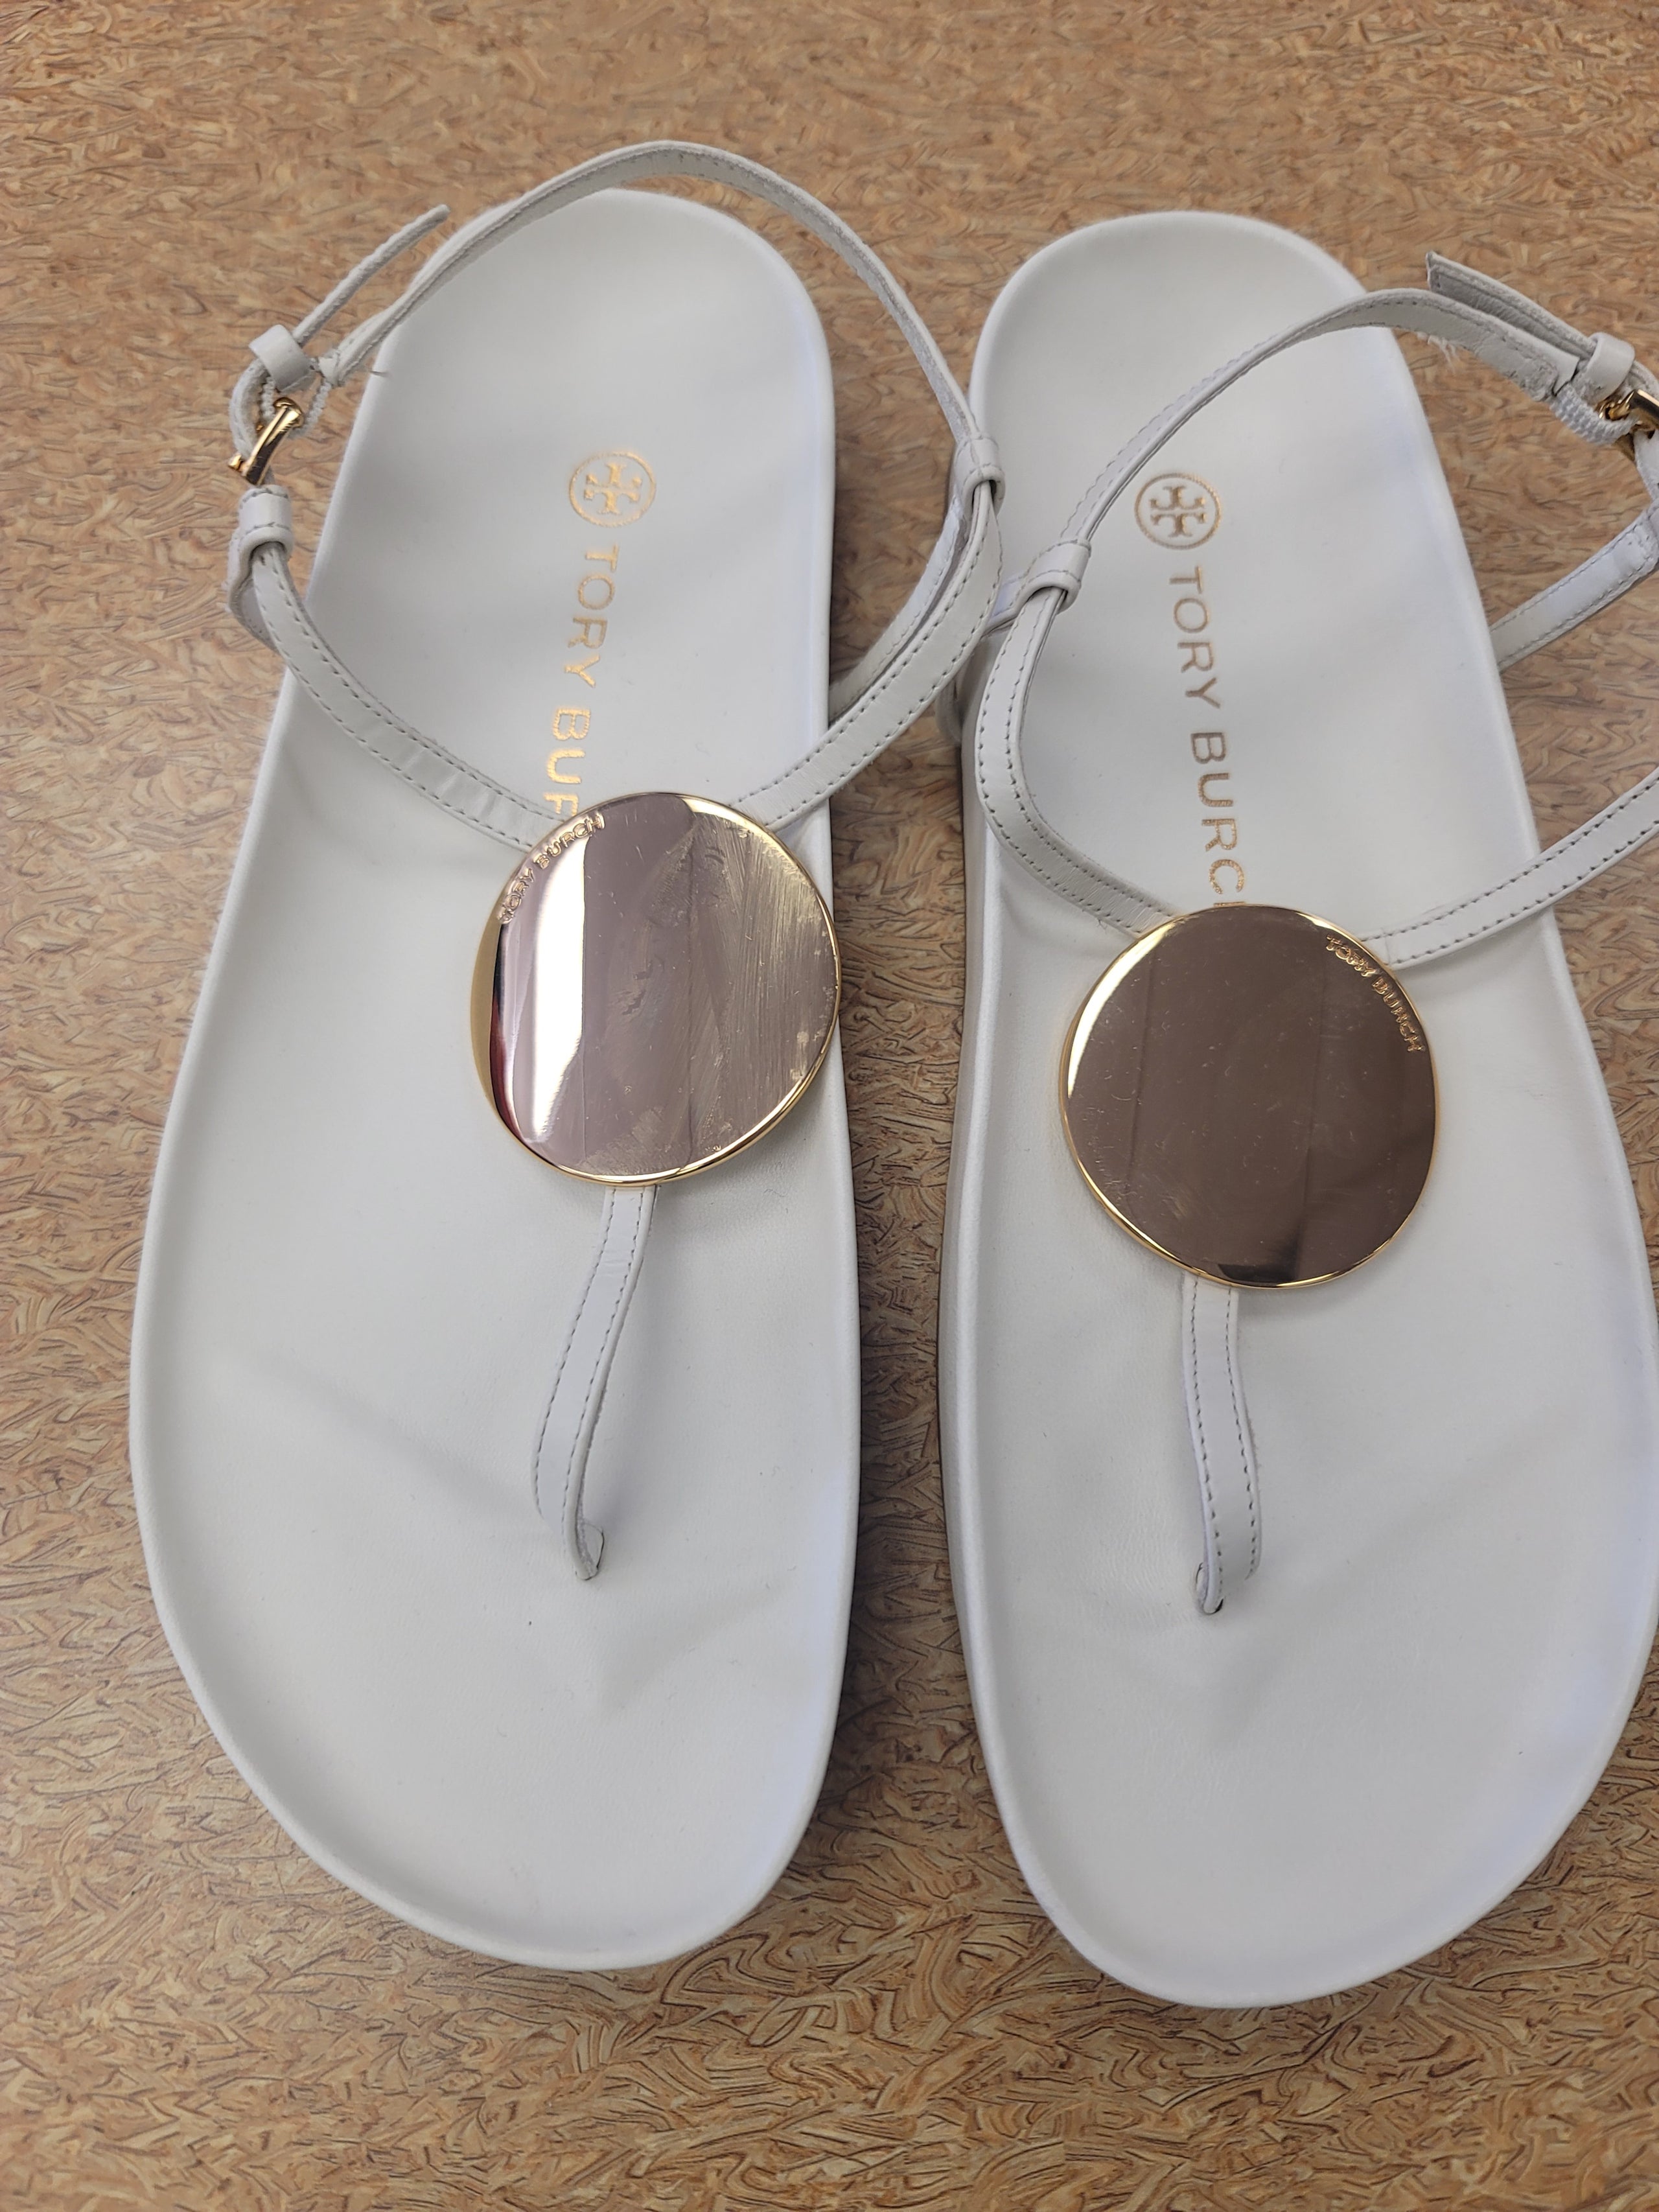 Tory Burch Sandals size  